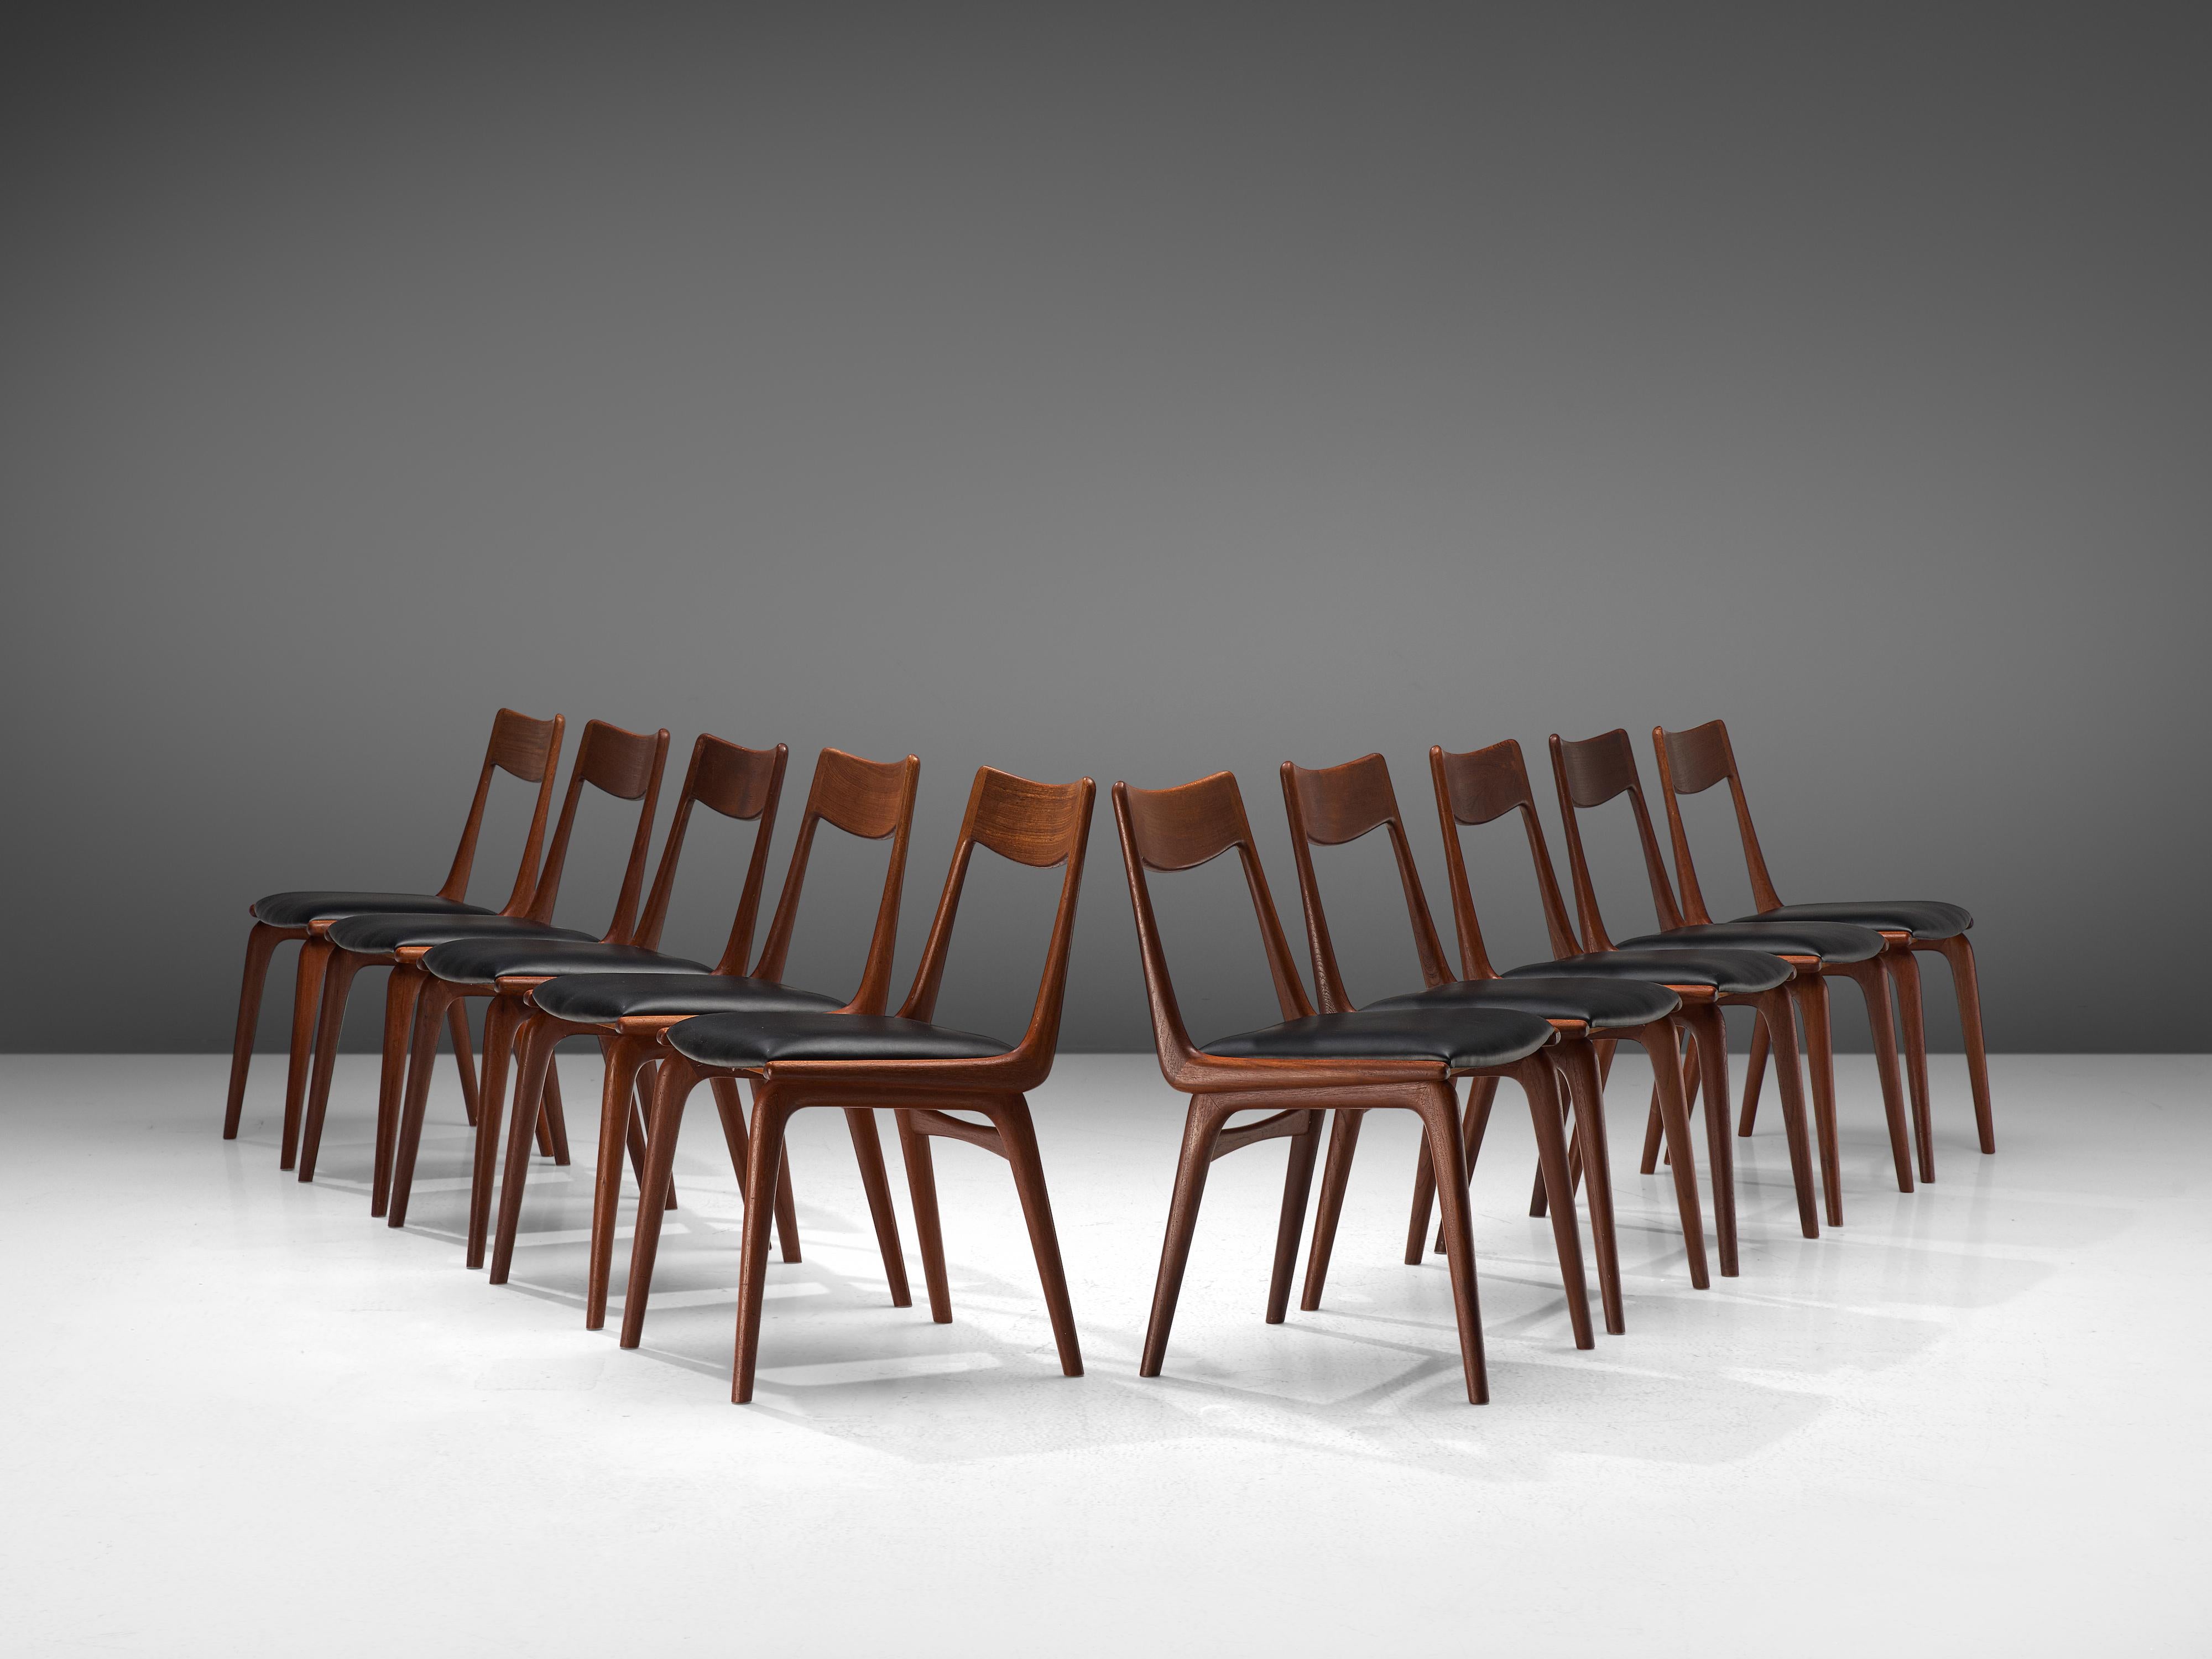 Alfred Christensen for Slagelse Møbelvaerk, set of 10 dining chairs model 370, teak, leatherette, Denmark, 1960s

Elegant set of Danish dining chairs, featuring a teak frame. Seen from the side, the seat's frame that flows over to the backrest has